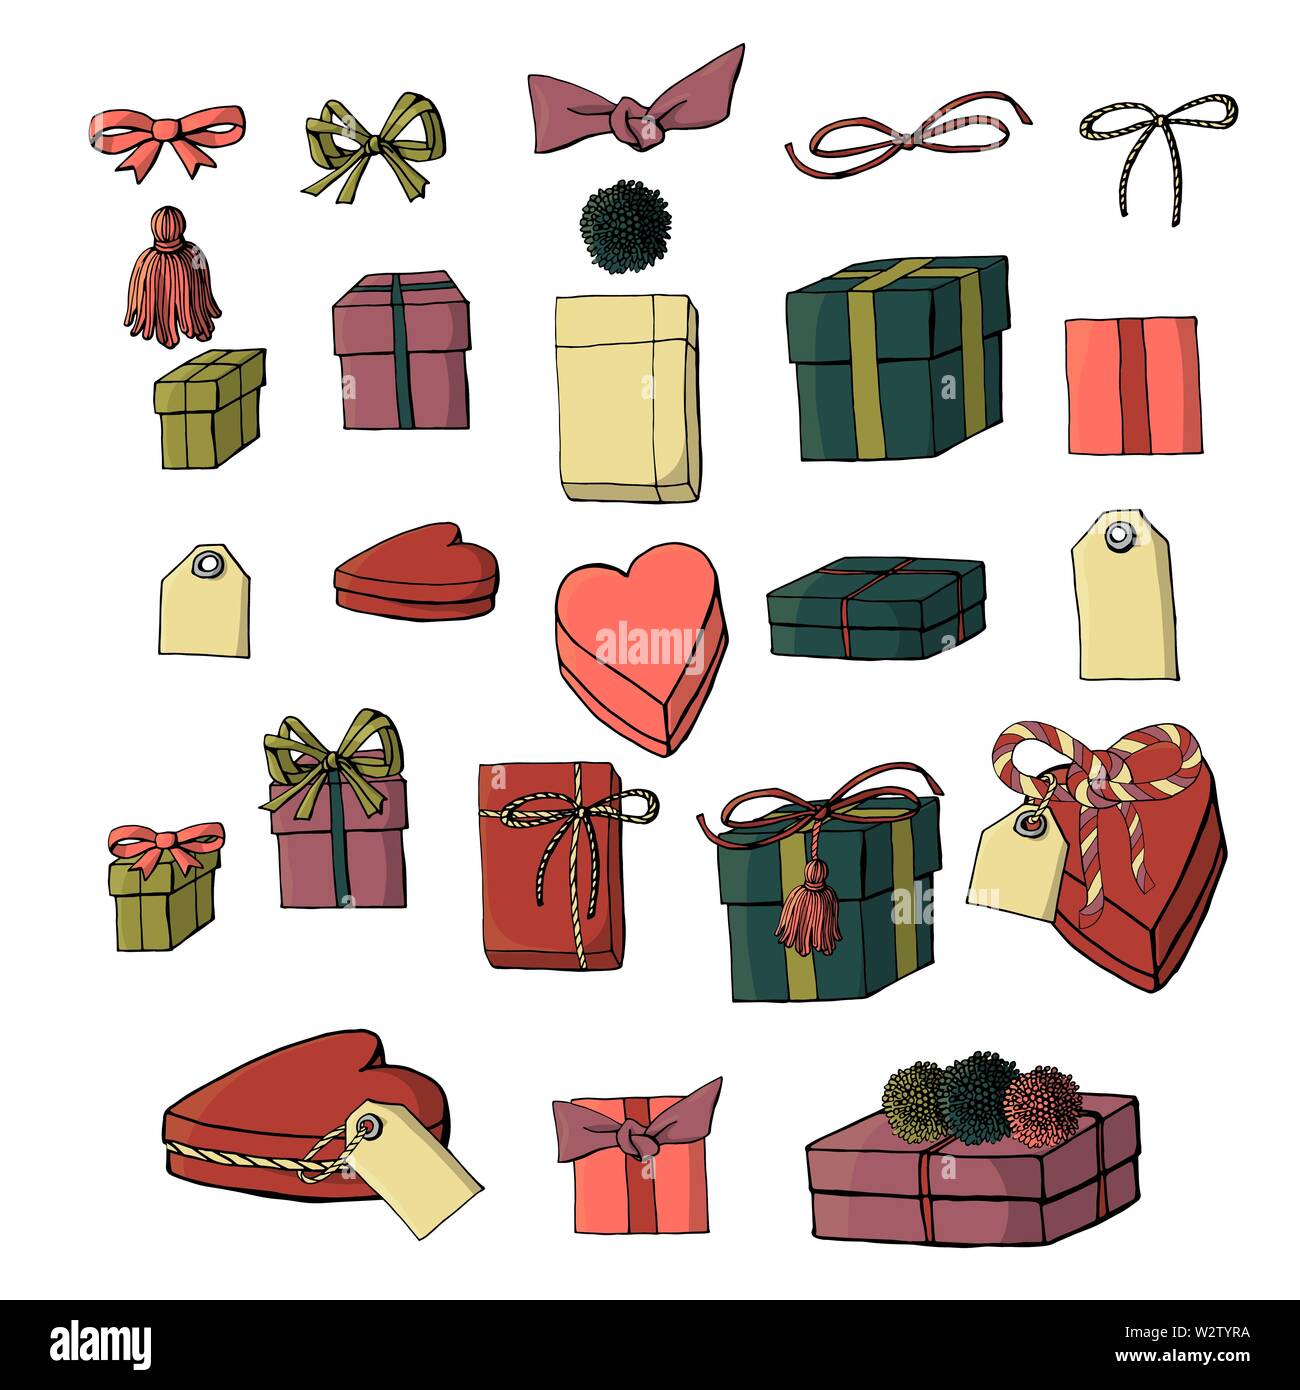 Wrapper for gift Stock Vector Images - Alamy